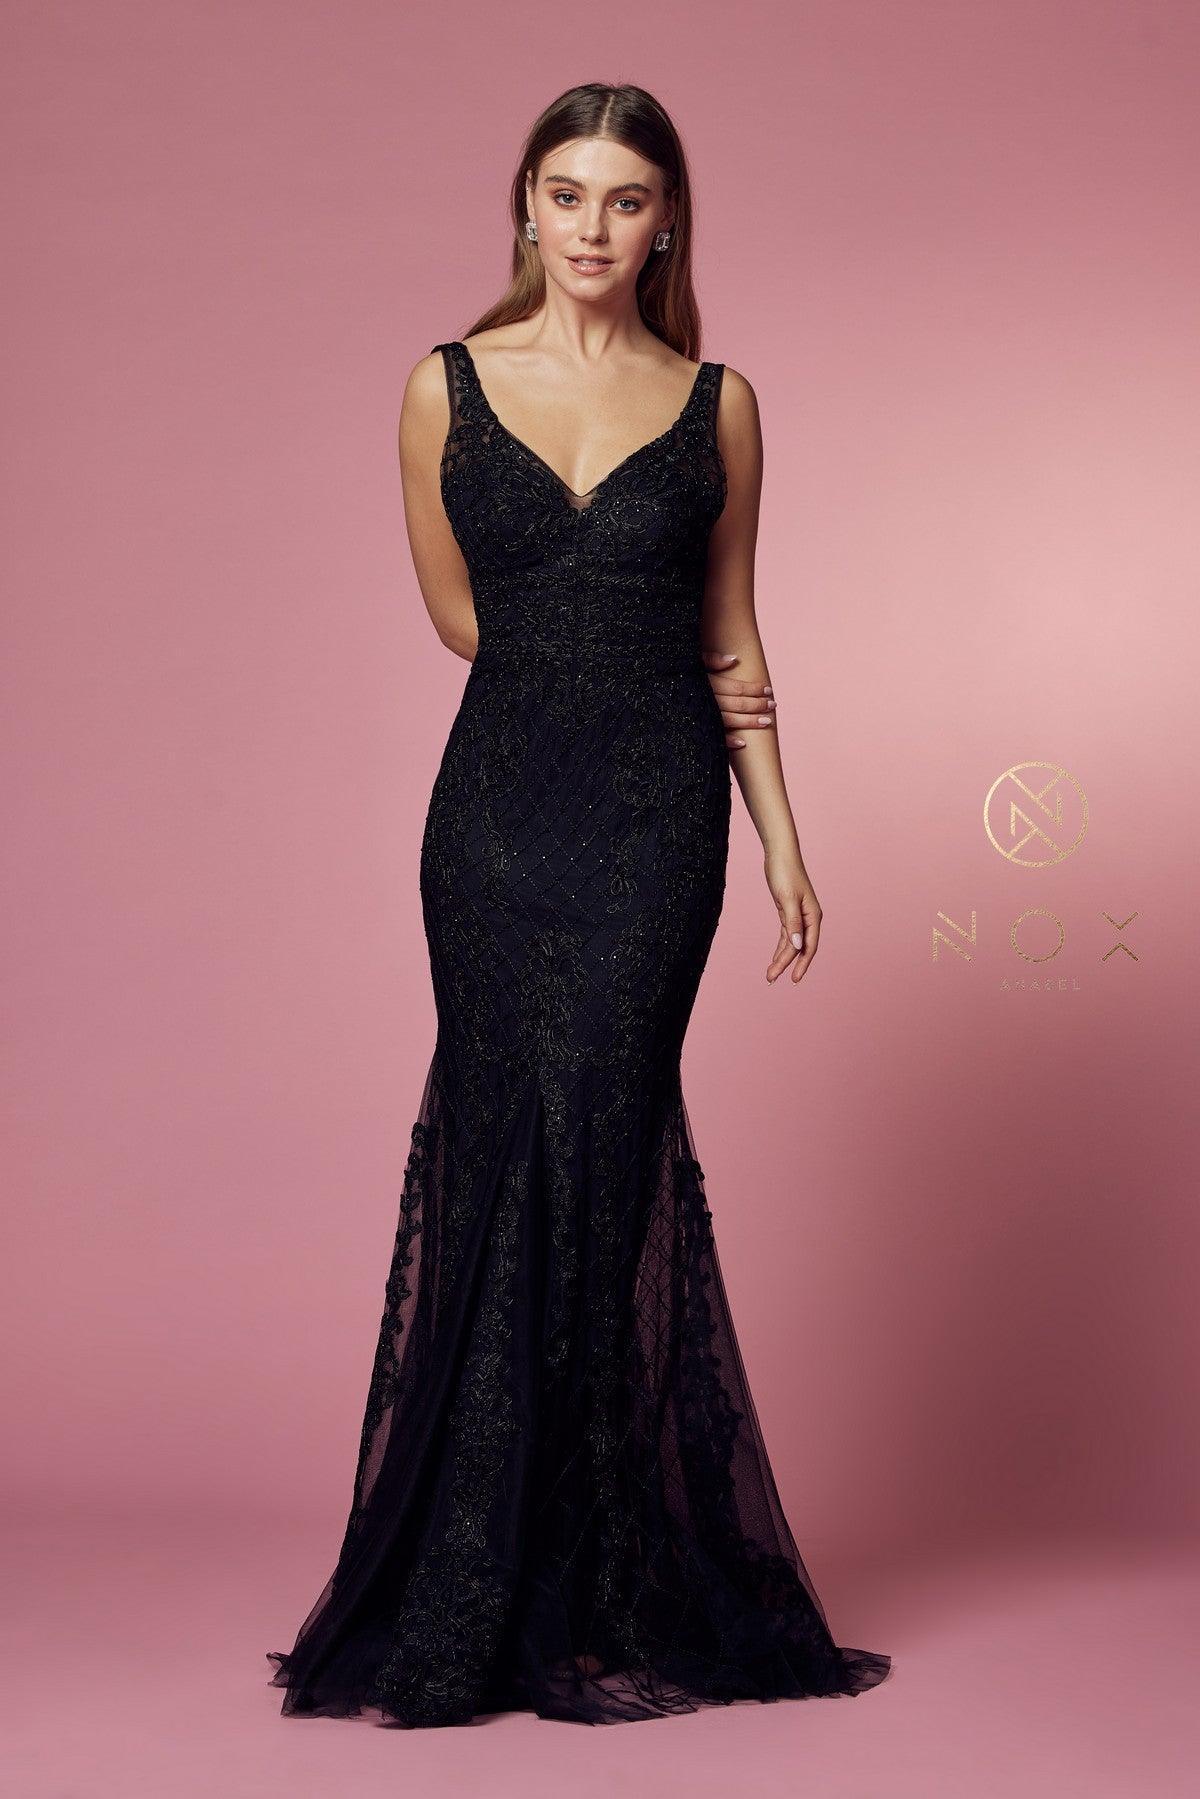 Long Formal Sleeveless Mermaid Prom Dress Sale - The Dress Outlet